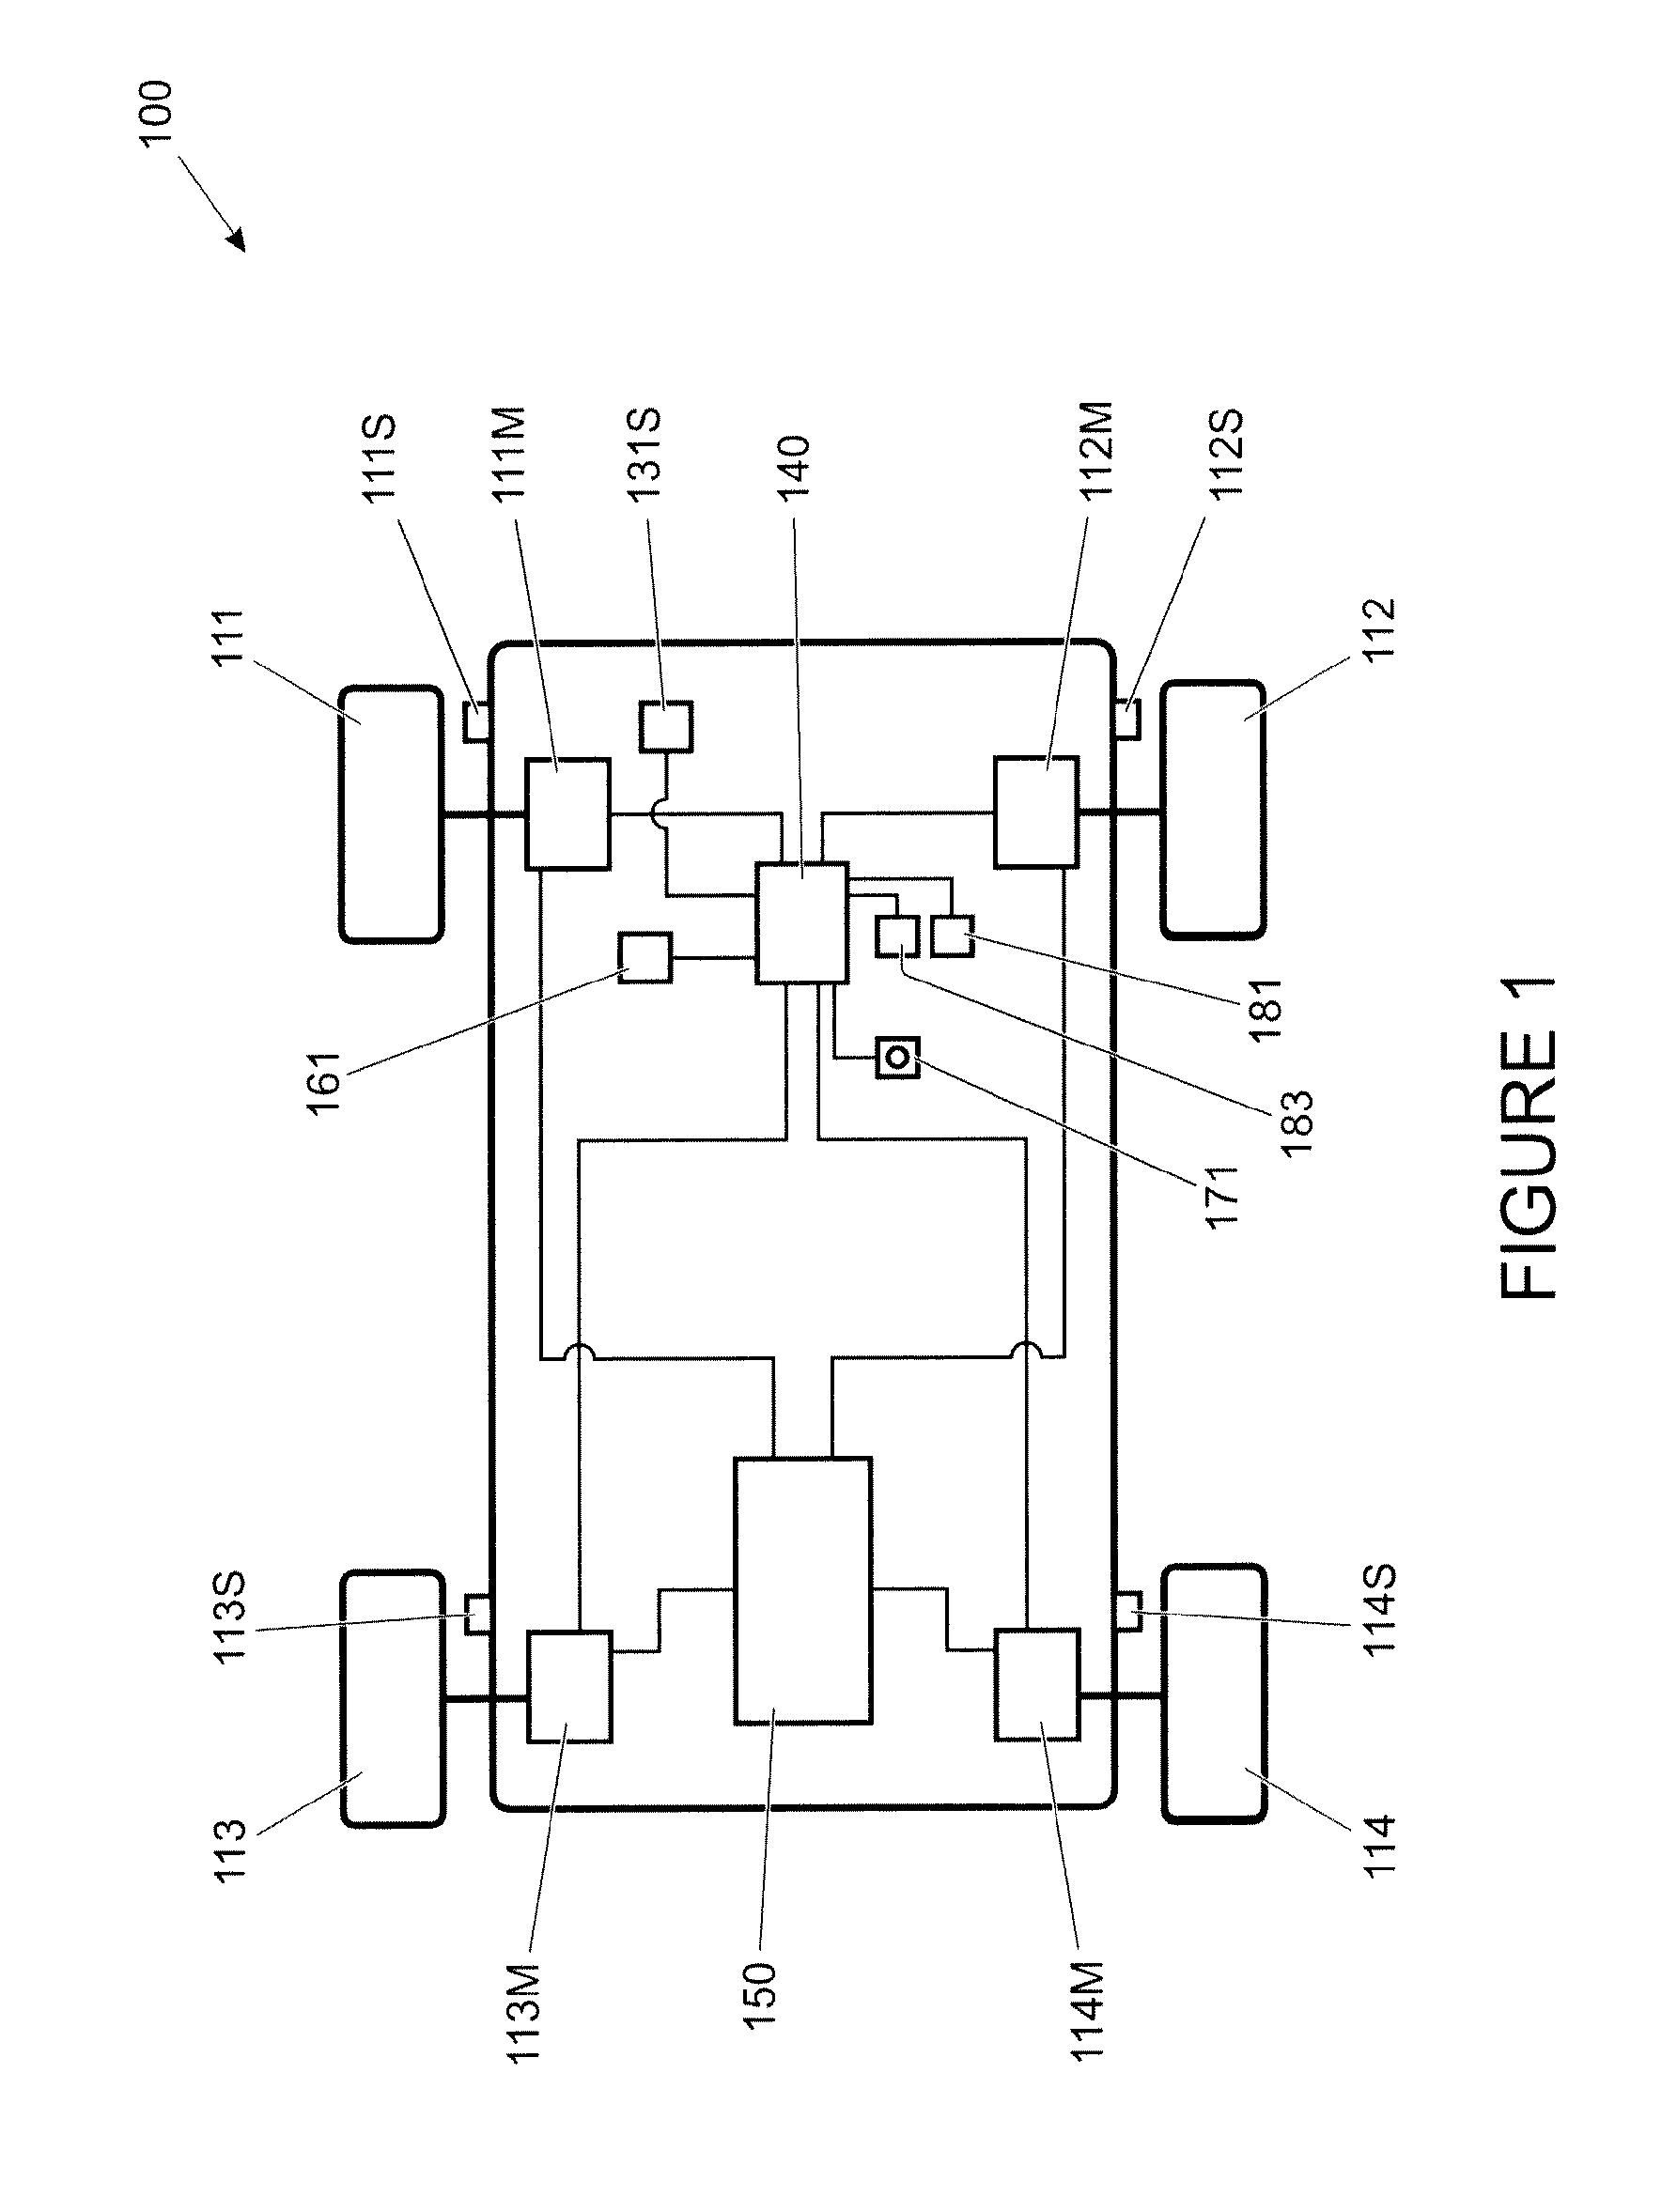 Vehicle control system and method to provide desired wheel slip